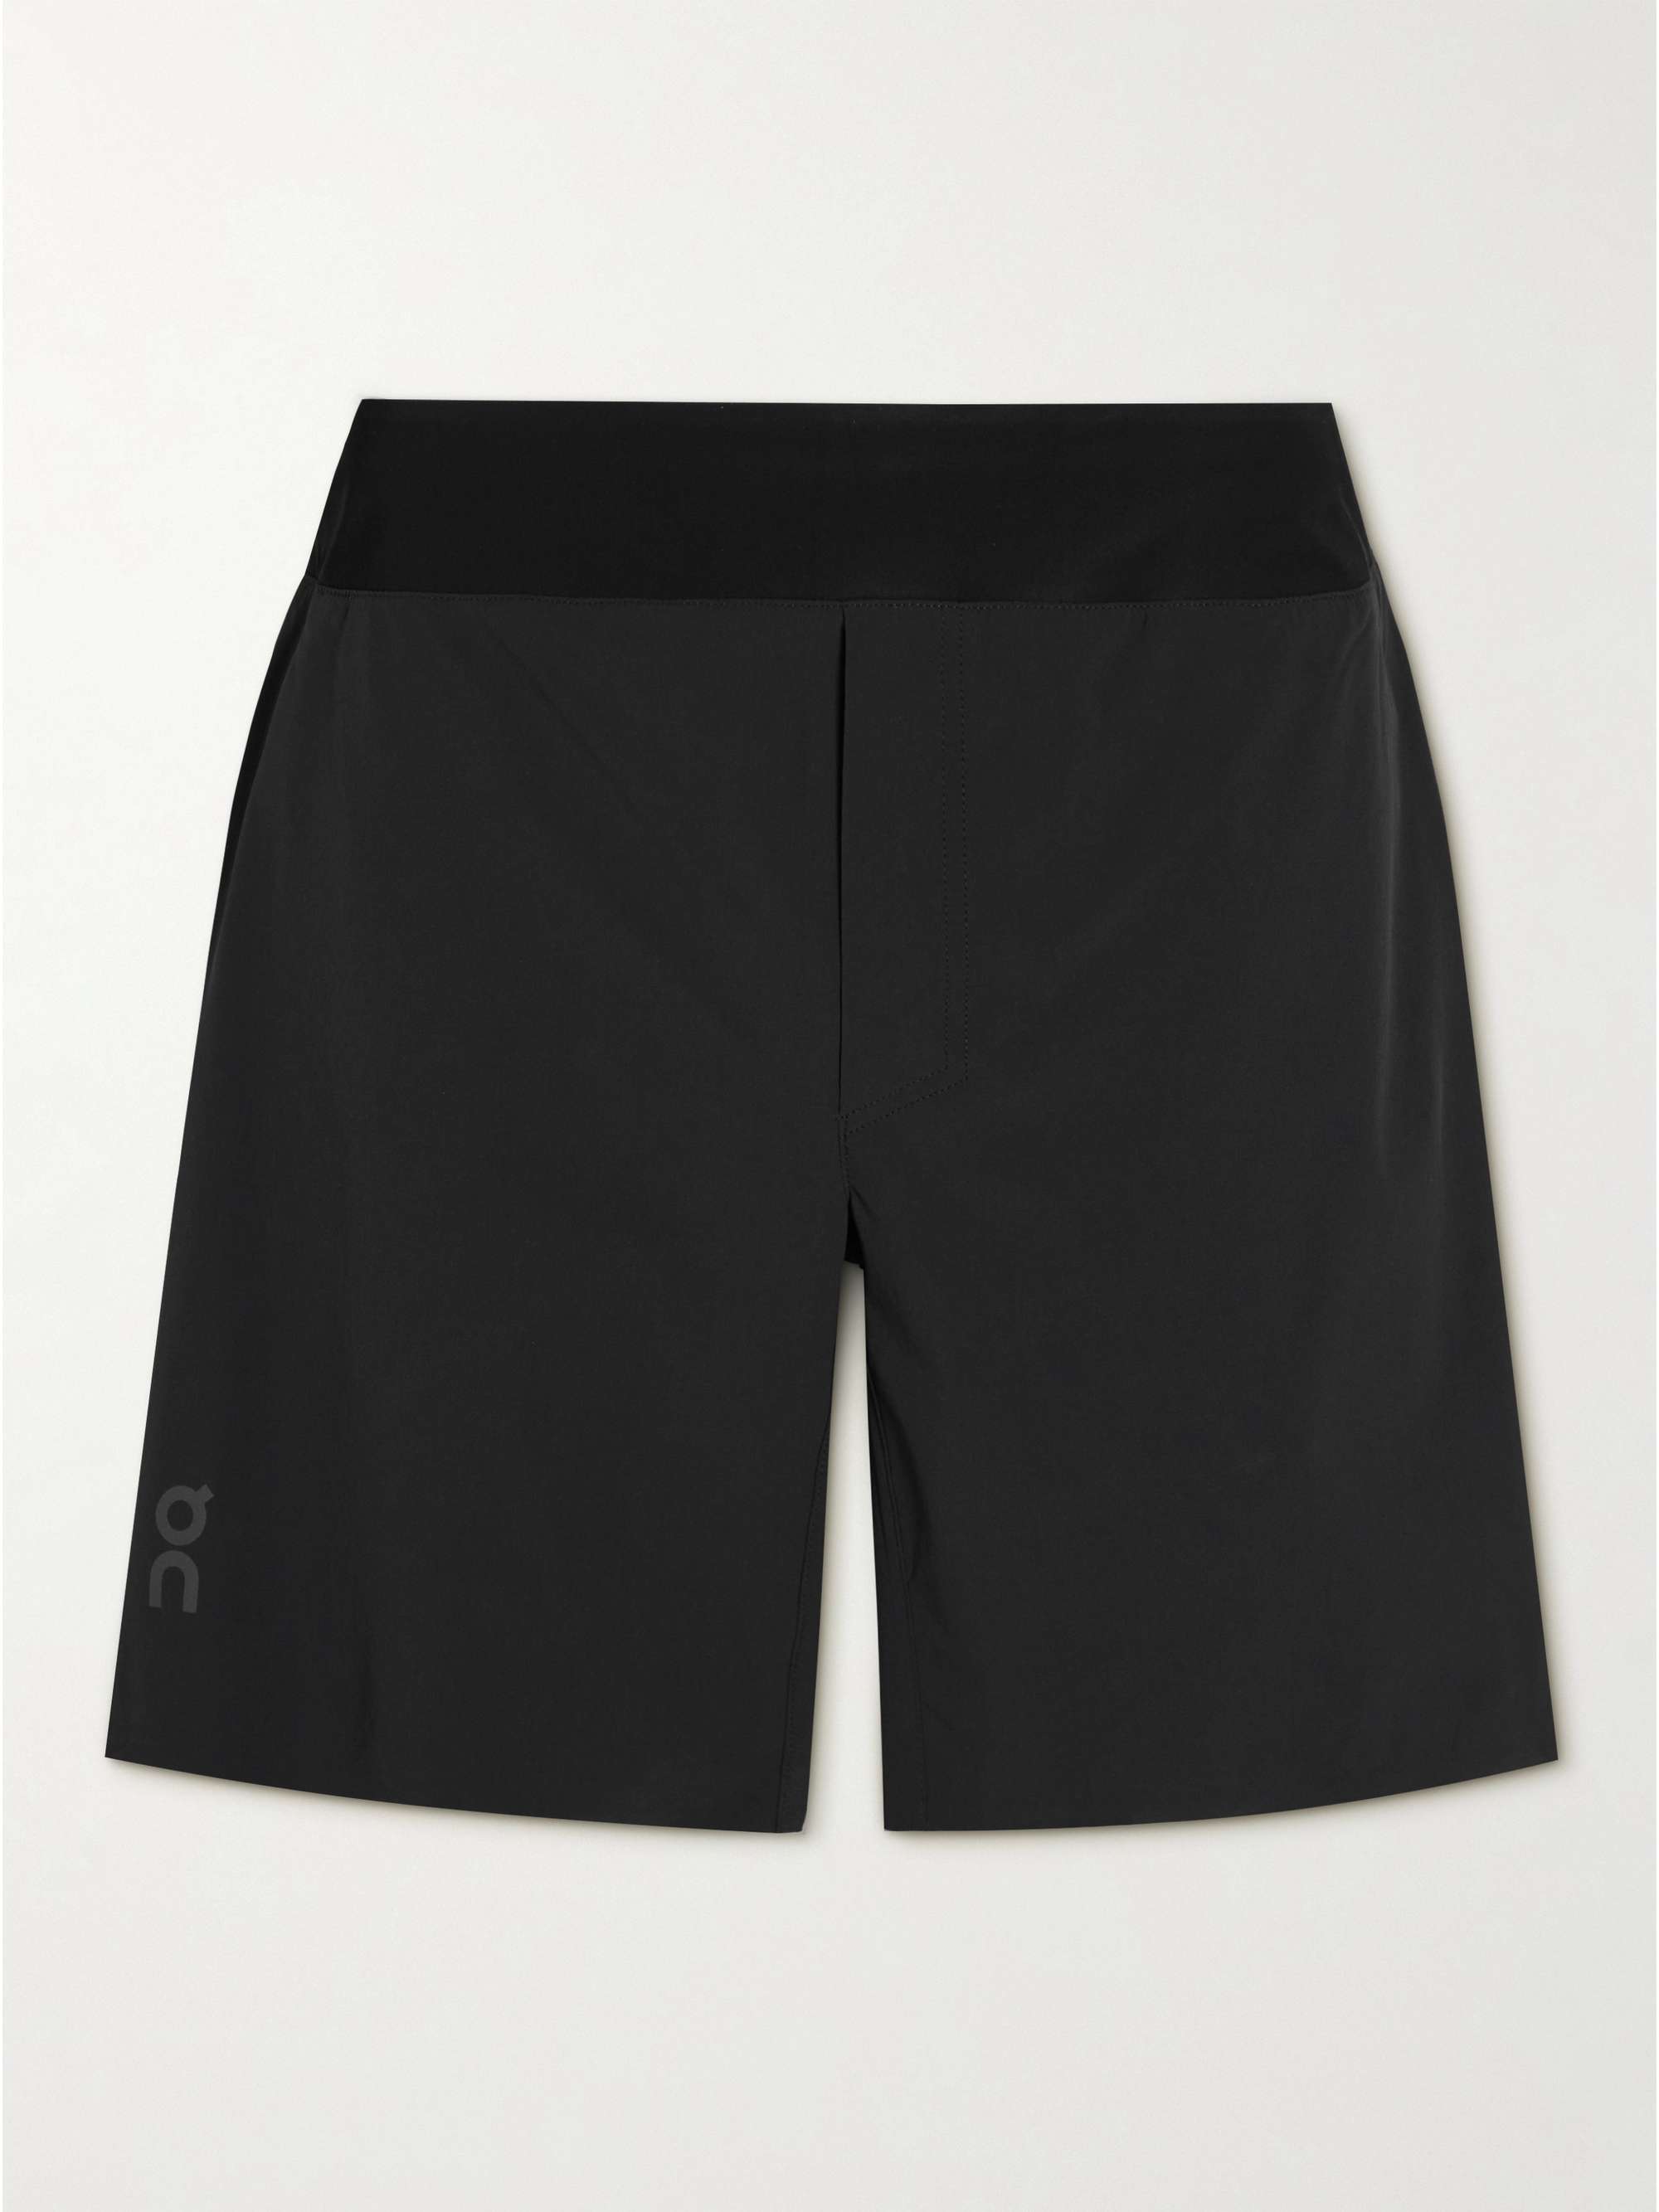 UNIQLO Ultra Stretch DRY-EX Shorts Men's S Black Regular Fit Activewear  Workout